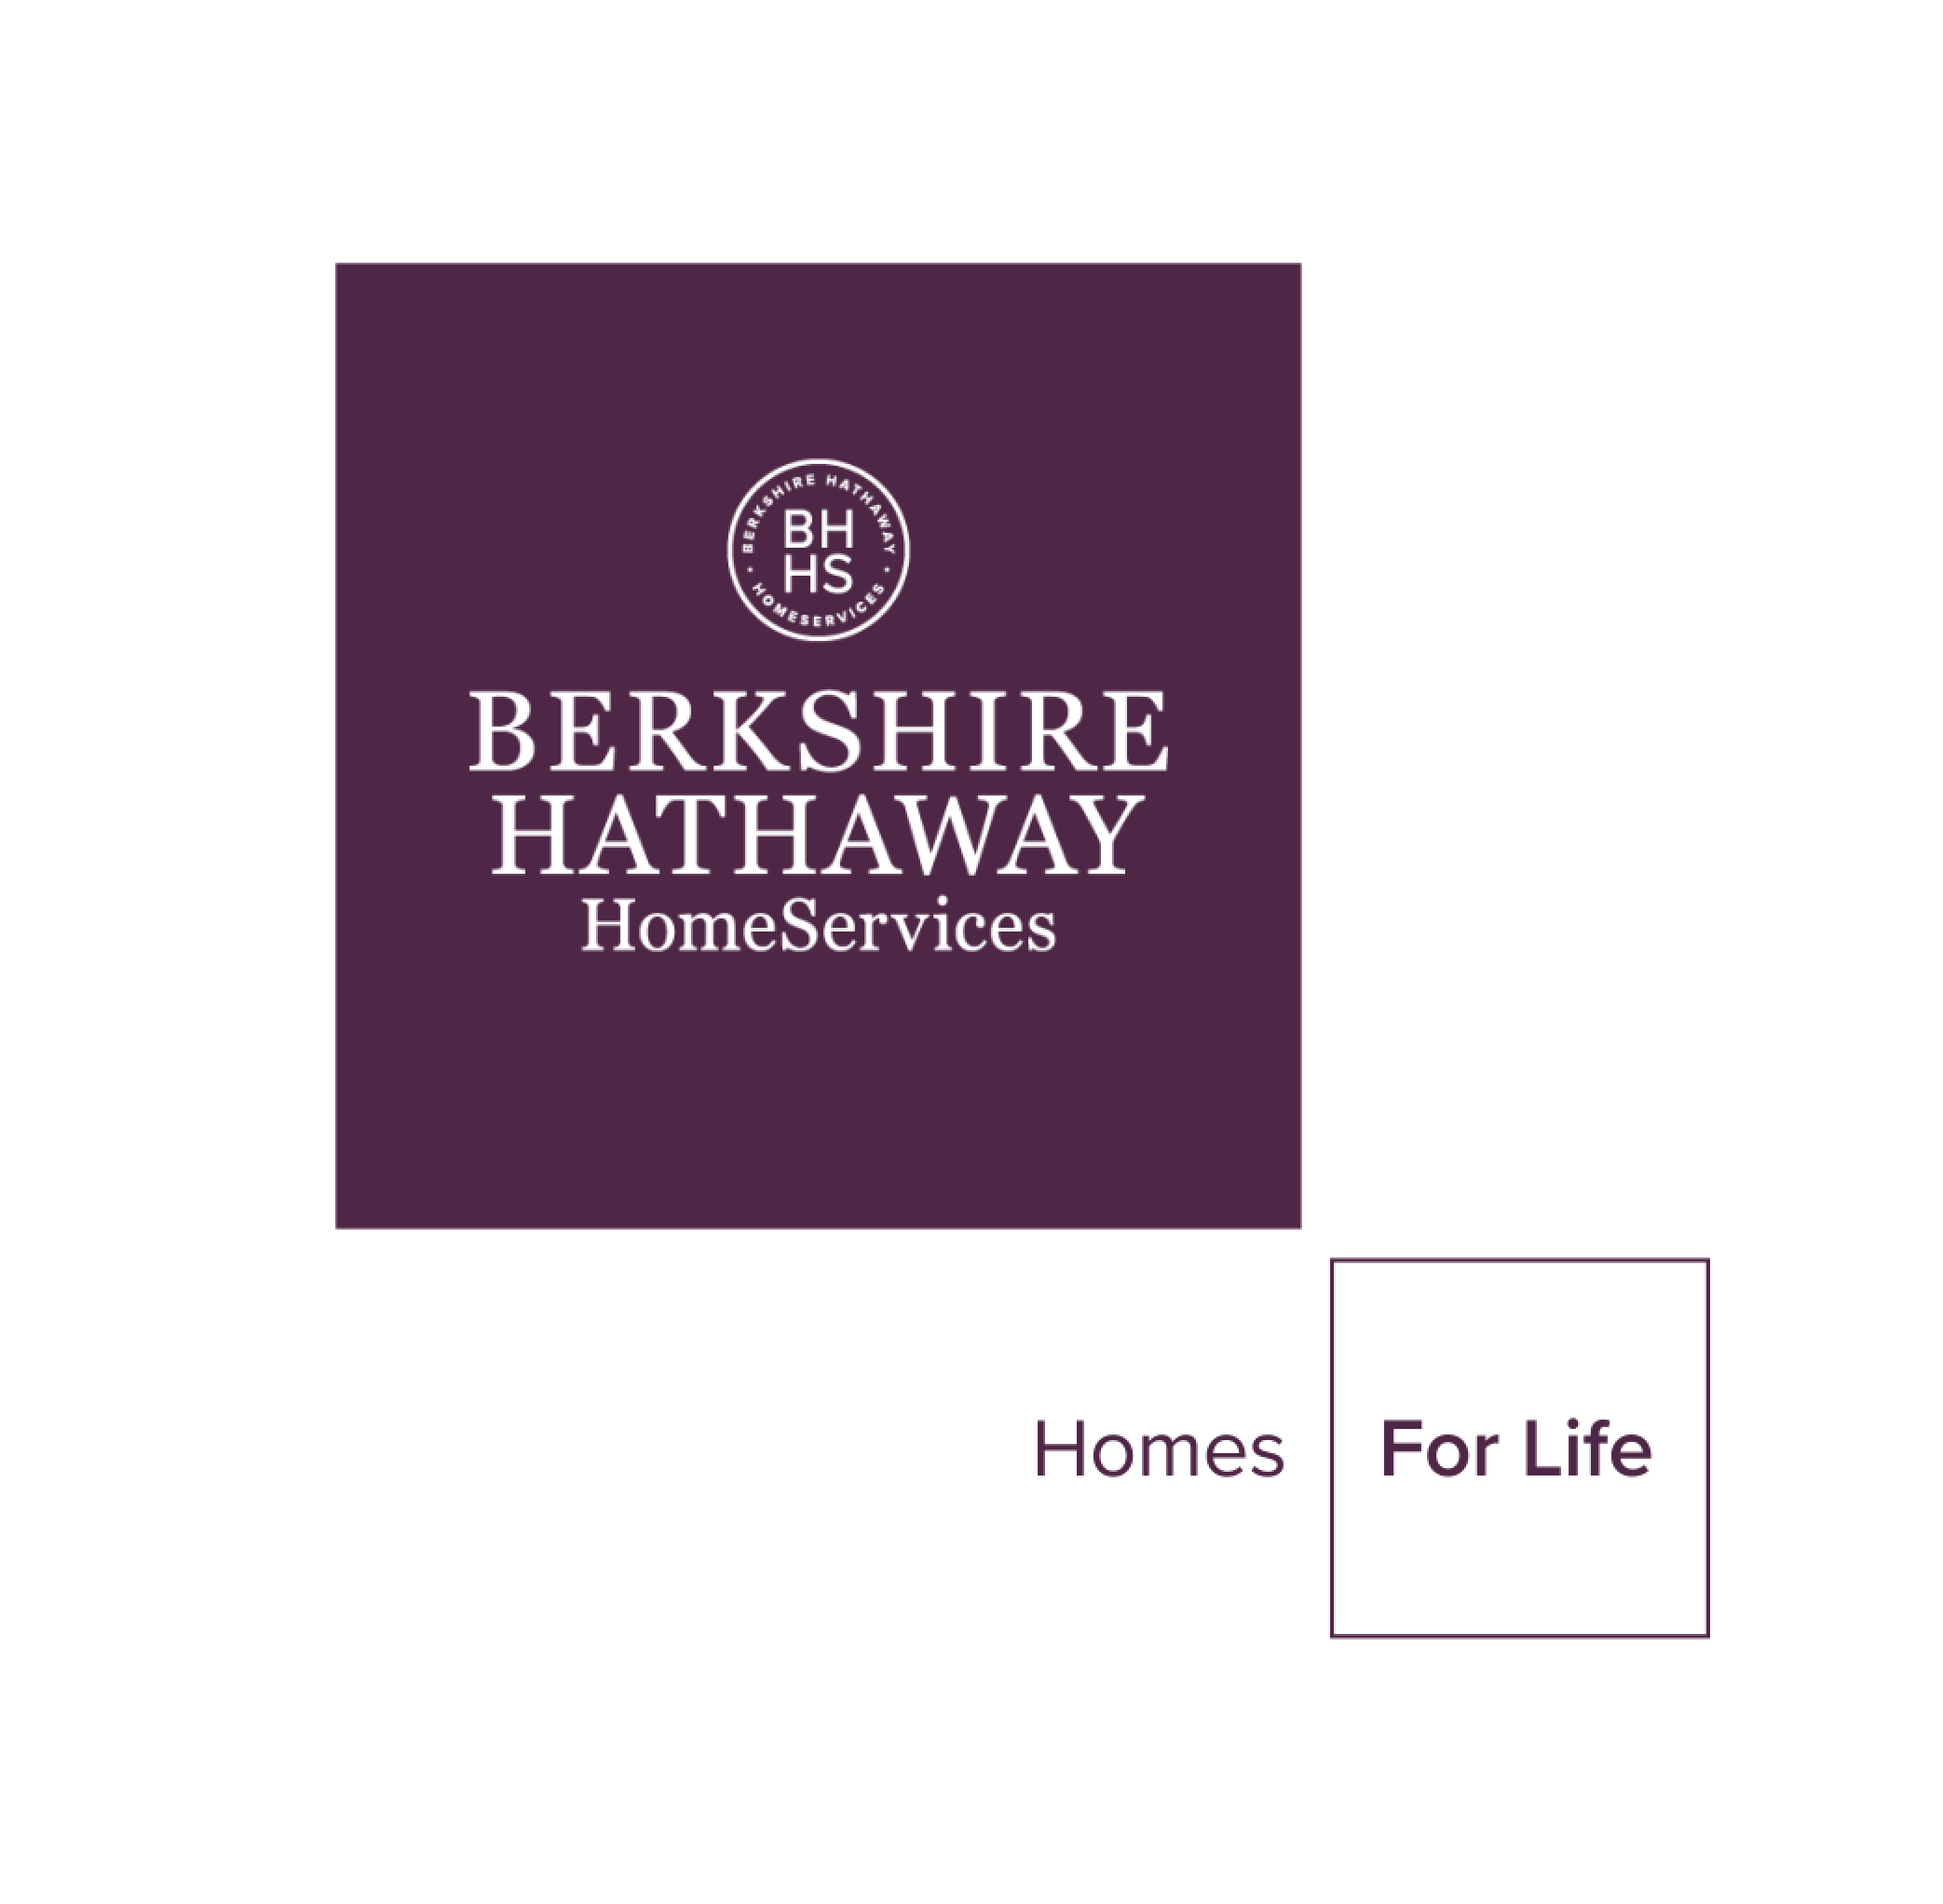 Berkshire Hathaway HomeServices Global Expasion